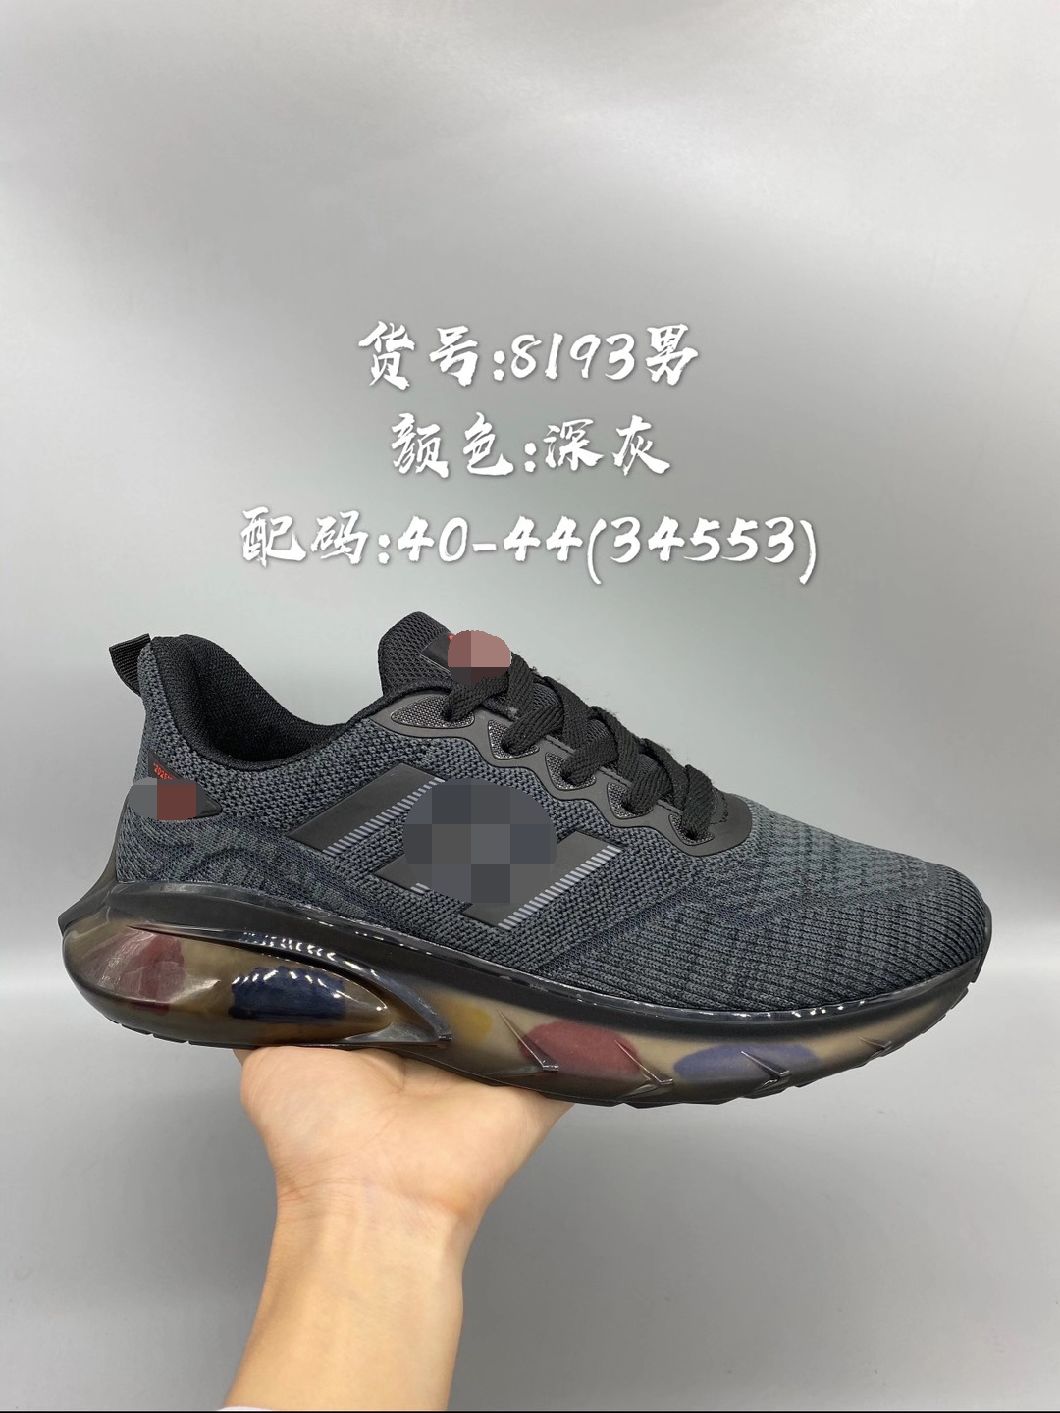 Hebei Shoes Factory Supply Low MOQ Stock Shoes Order Men Sport Shoes